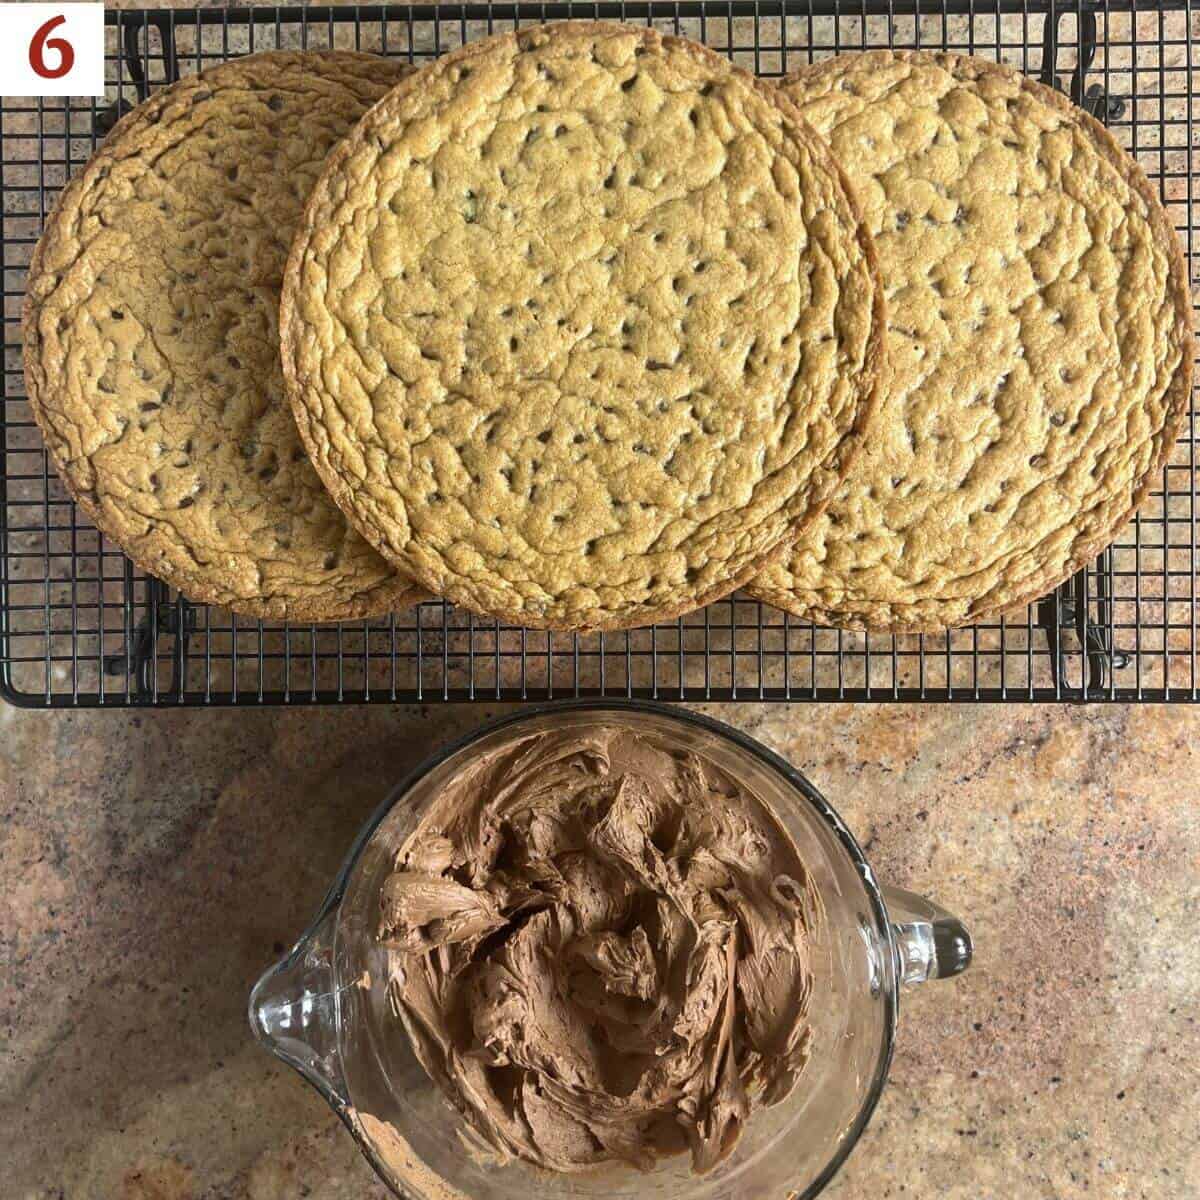 Cake layers on a cooling rack next to a bowl of chocolate frosting from overhead.